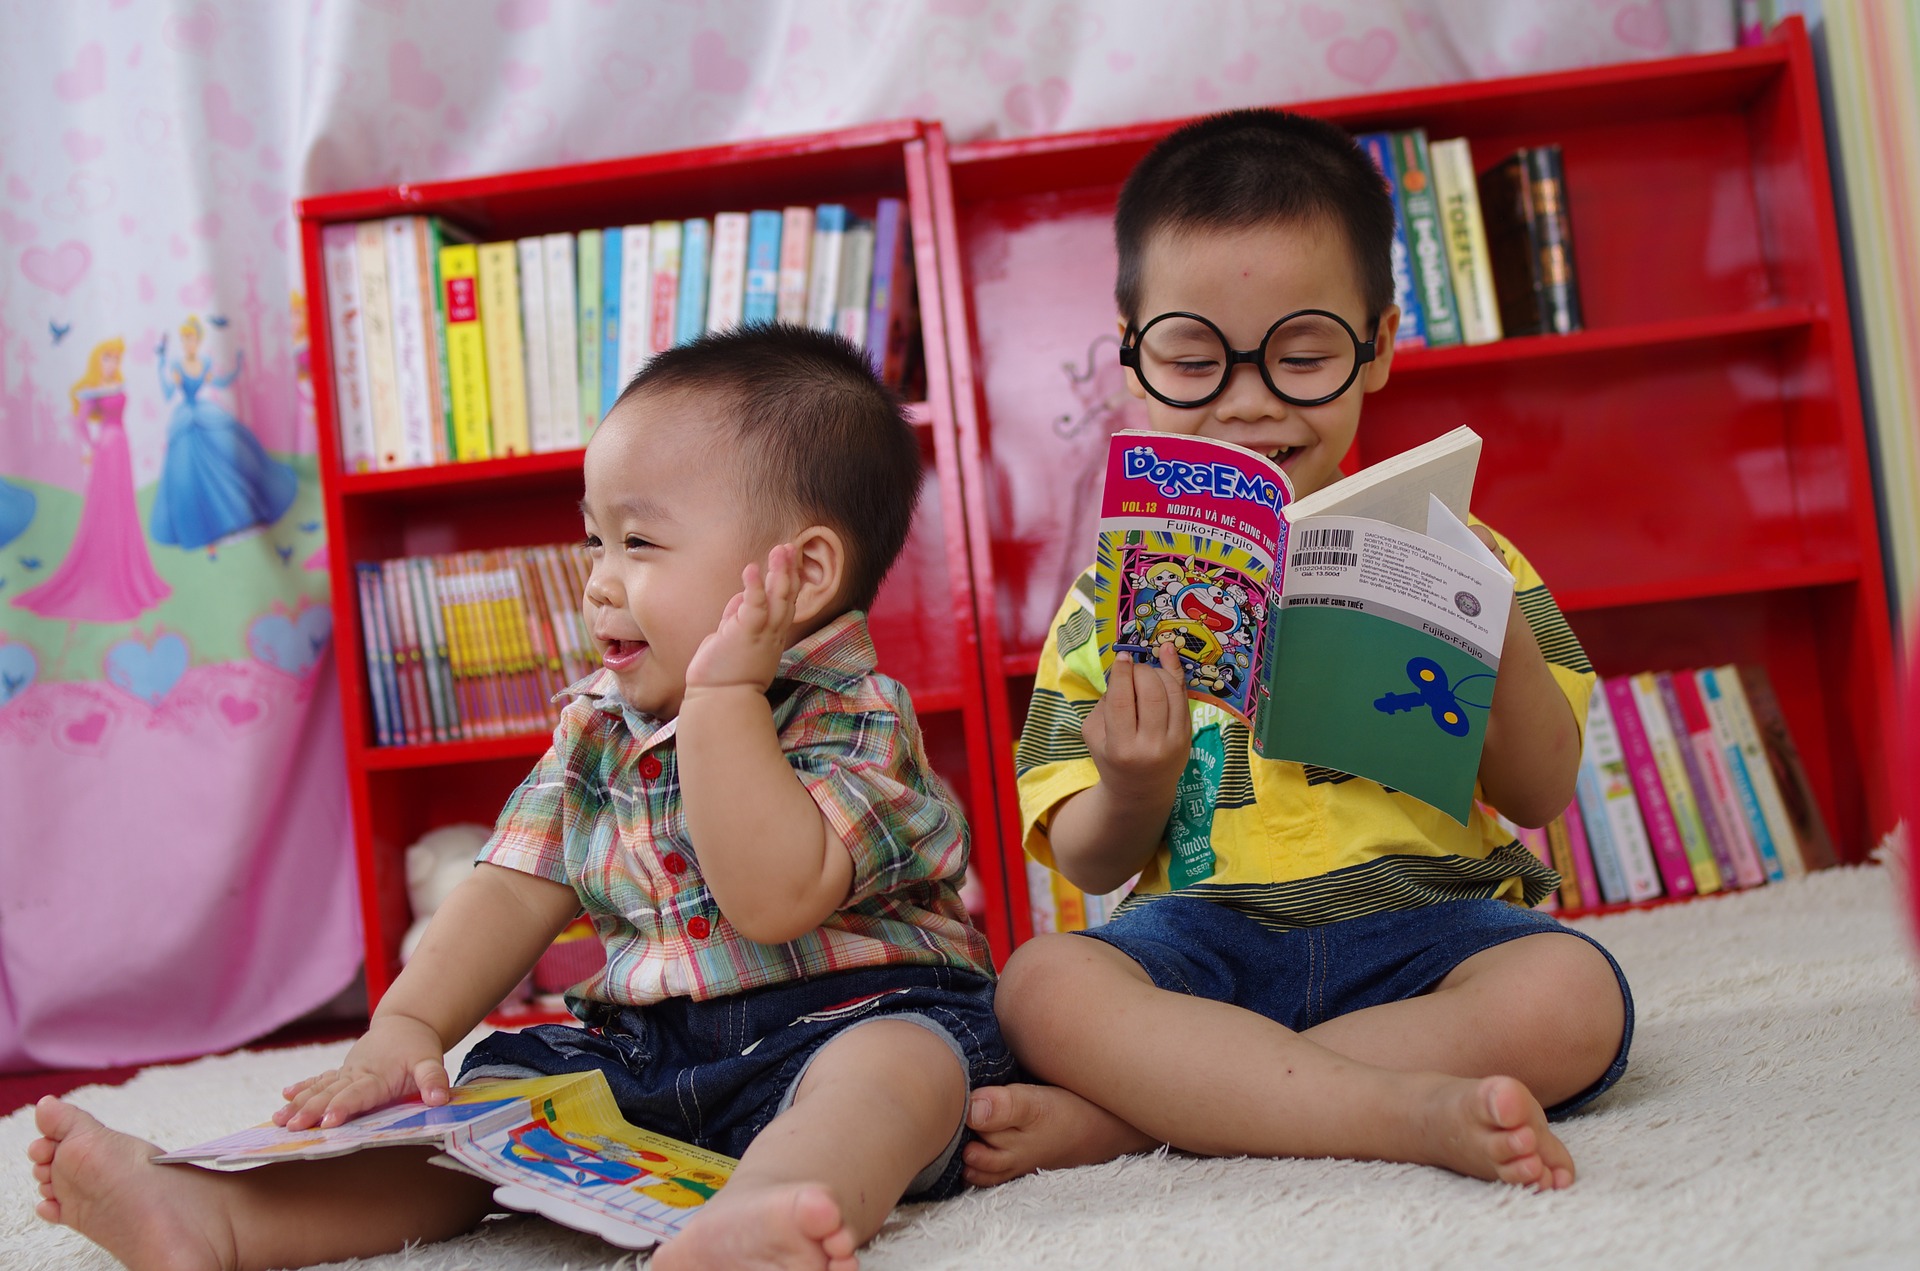 Two young boys reading books